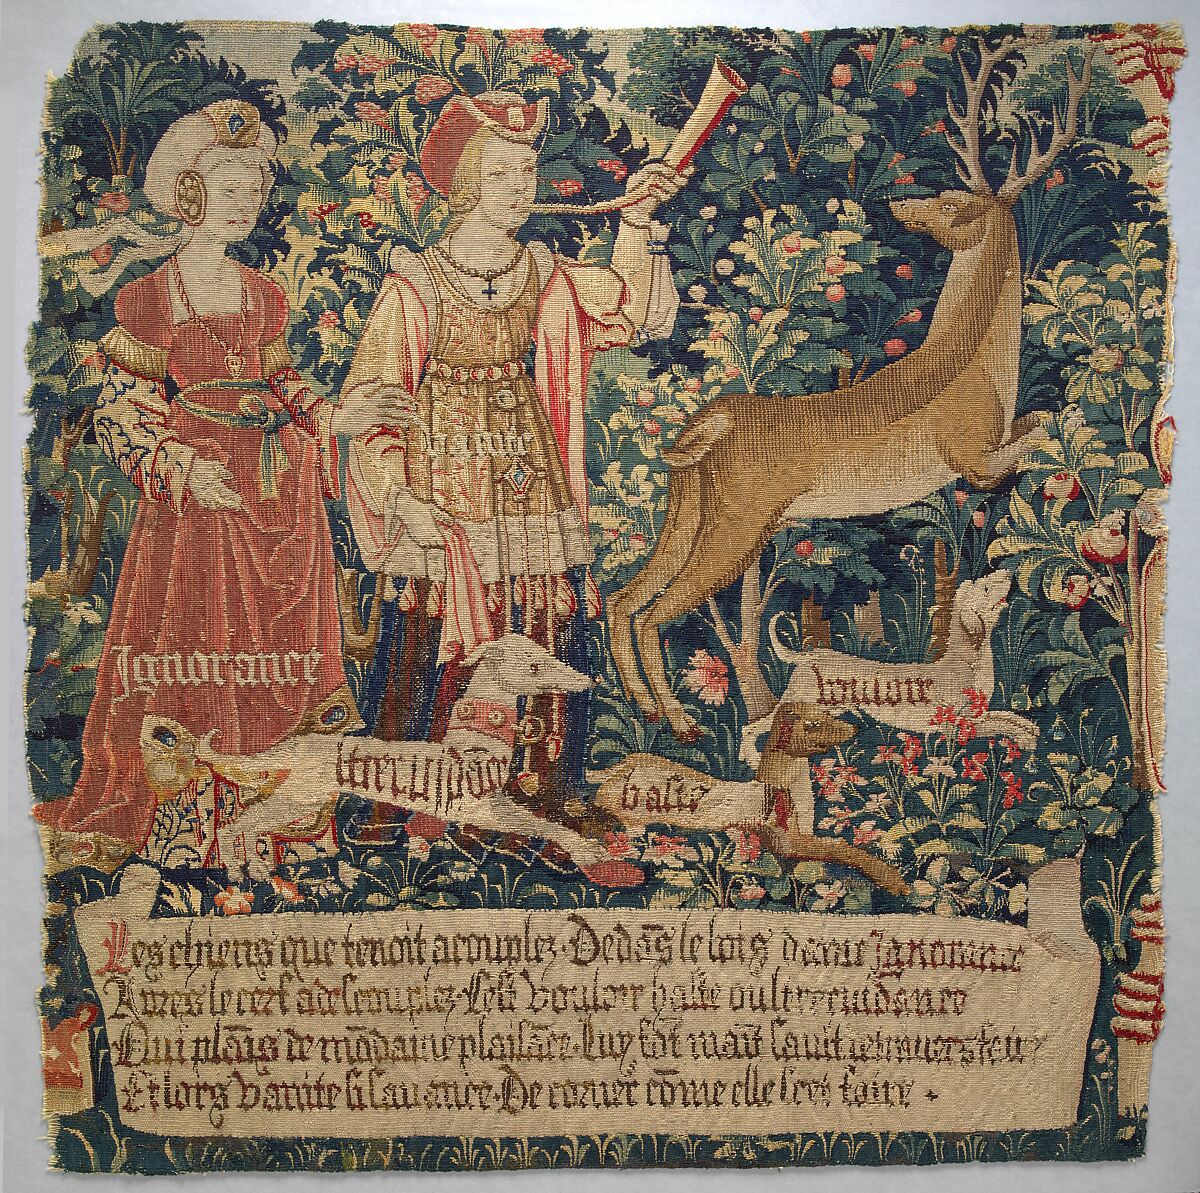 Vanity Sounds the Horn and Ignorance Unleashes the Hounds Overconfidence, Rashness and Desire (from The Hunt of the Frail Stag), Wool warp,  wool and silk wefts, South Netherlandish